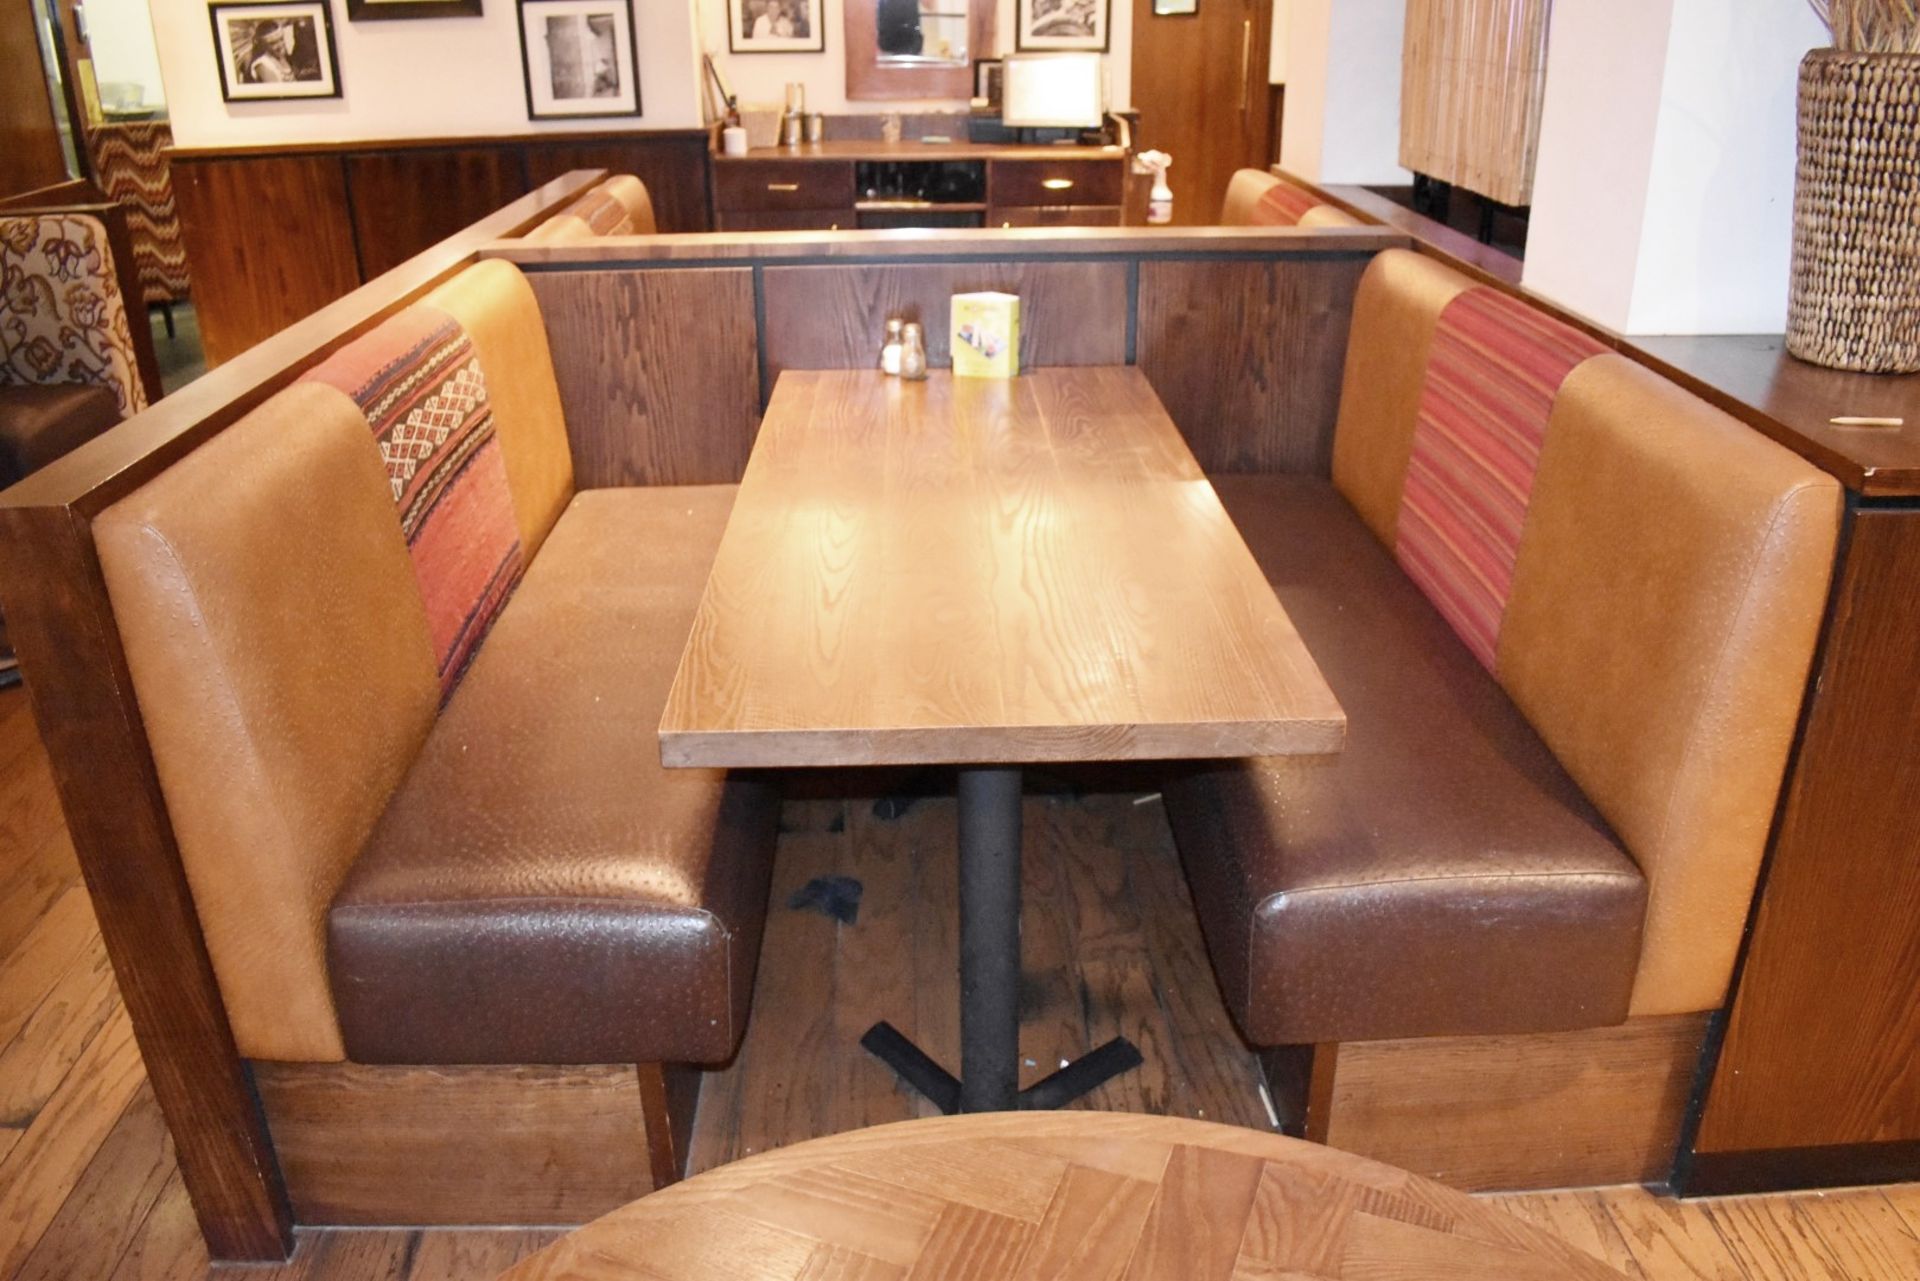 15-Pieces Of Restaurant Booth Seating Of Varying Length